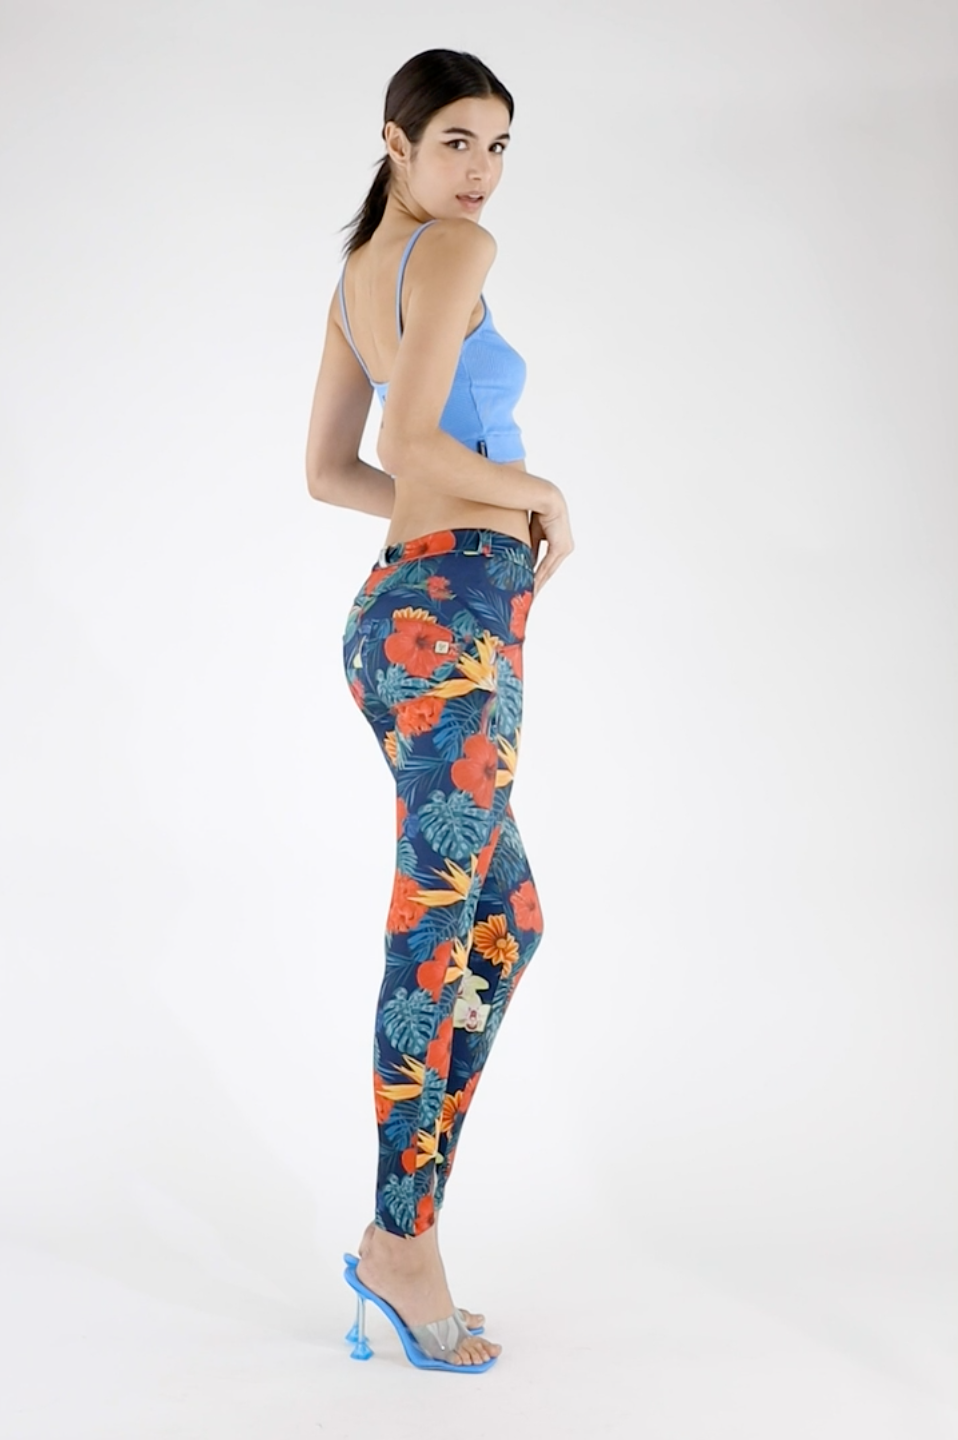 (WRUP1RS254-FLO22) WR.UP® Push Up Trousers With Eco-Friendly Breathable Floral Fabric